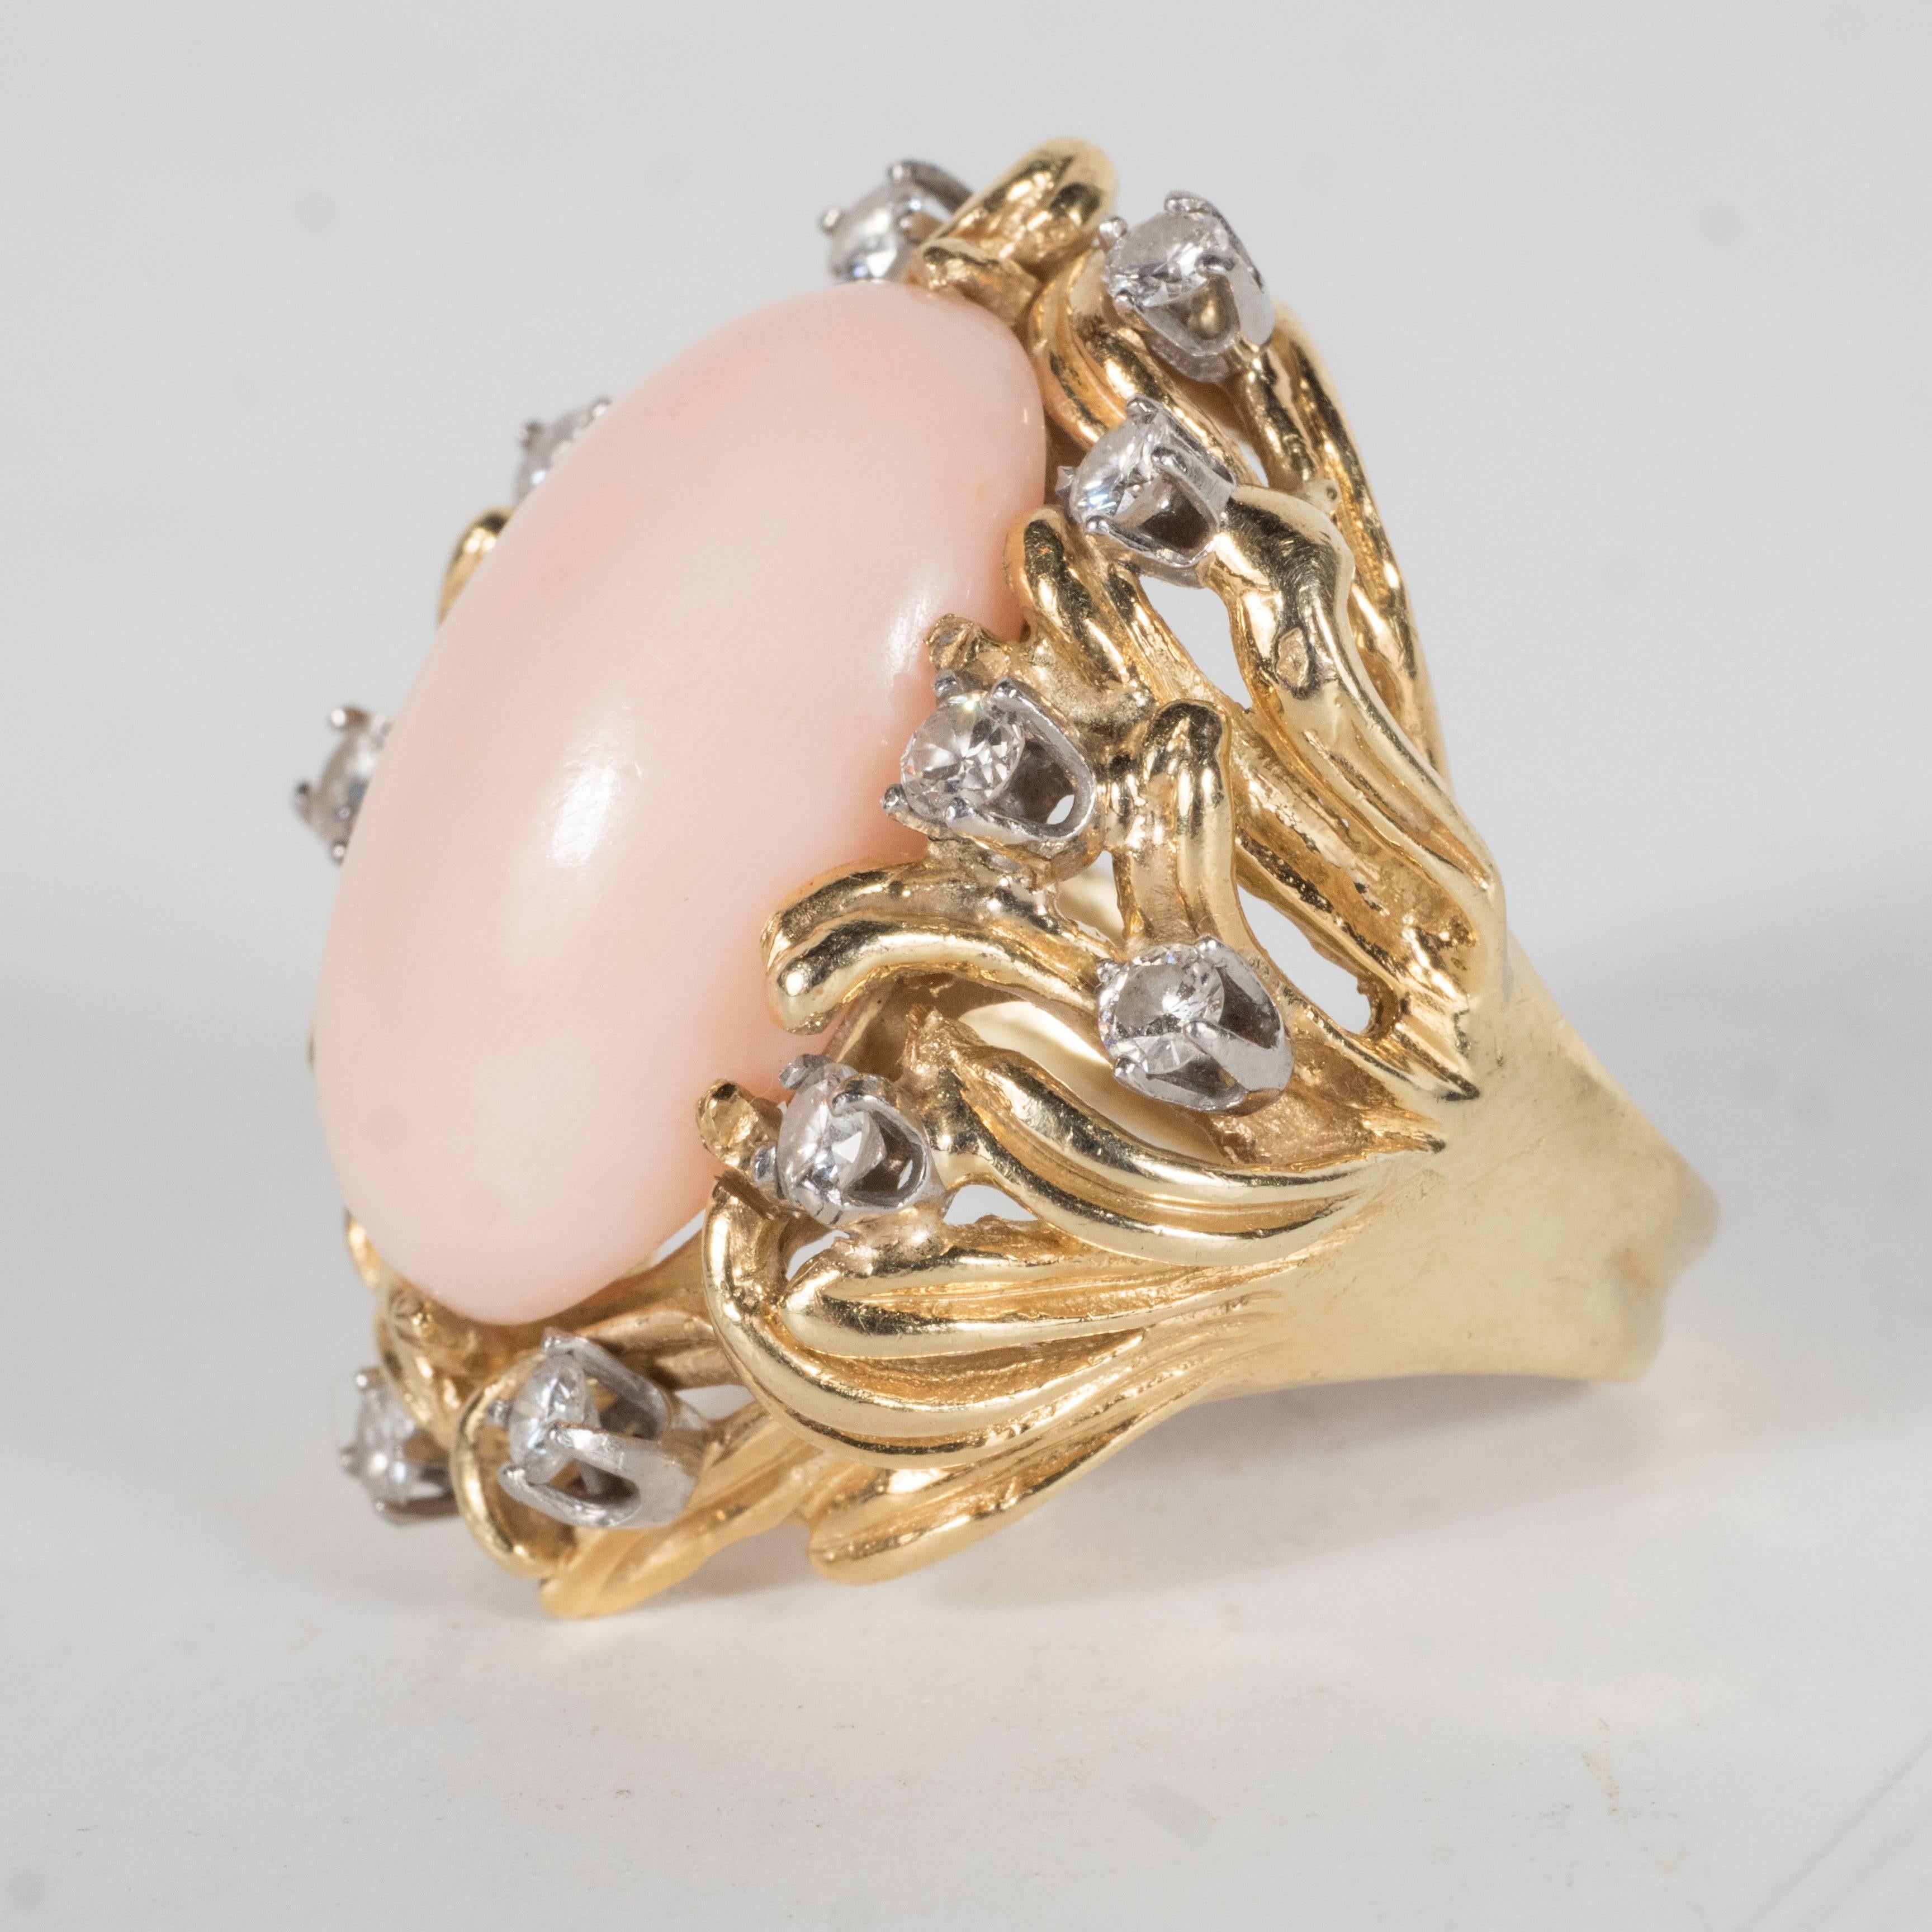 This Mid-century cocktail ring features an domed angel coral stone set in a 14k yellow gold designed with stylized foliate tendril details supporting 12 full cut fine diamonds. This ring is approximately a size 6 but the purchaser can size to